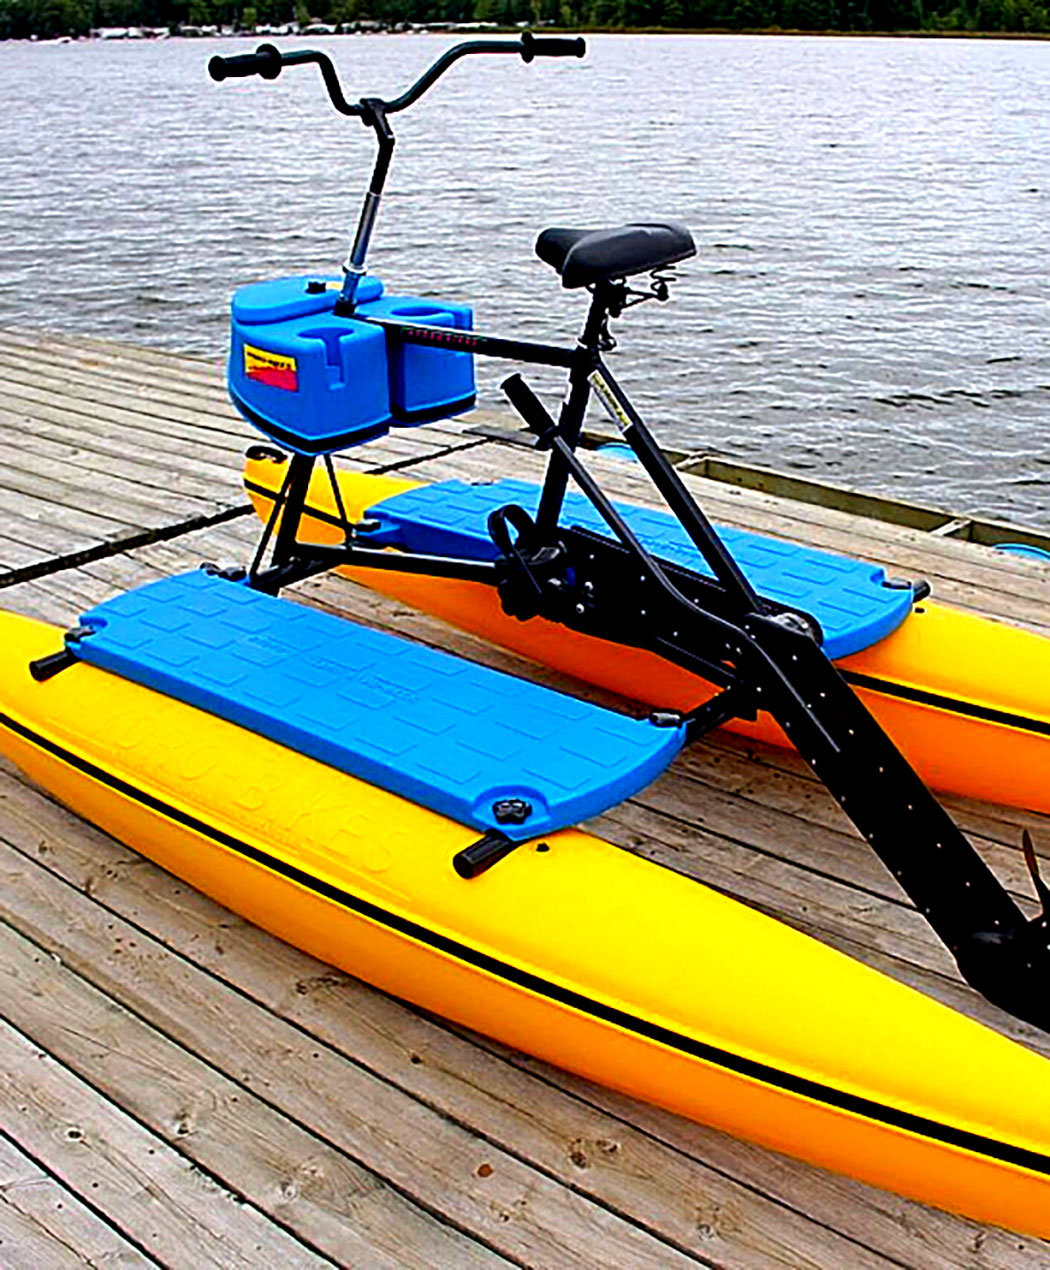 blue and yellow water bike on wooden dock